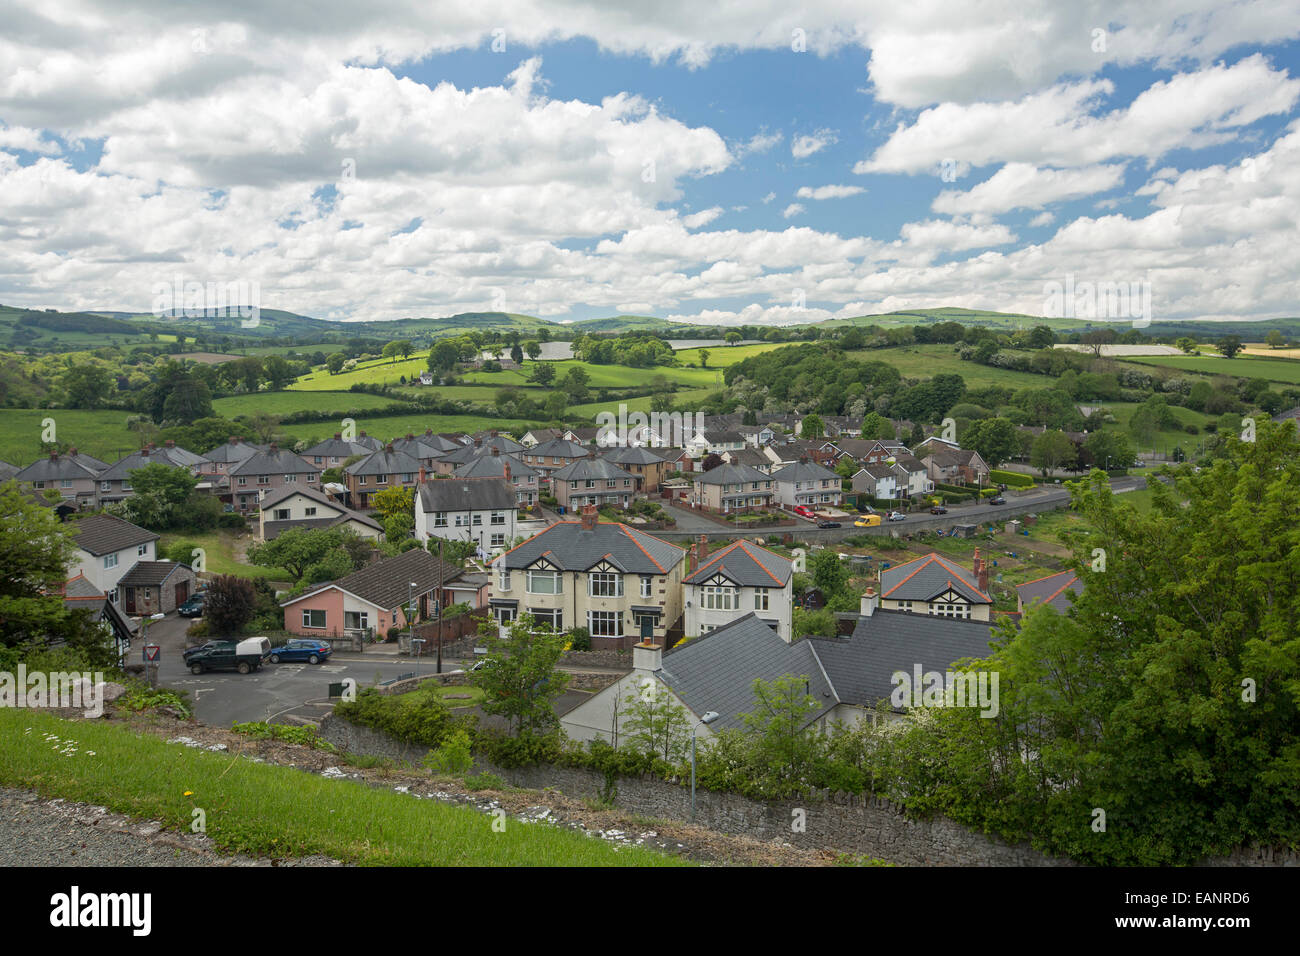 View, from hilltop castle, of historic Welsh town of Denbigh surrounded by emerald farmlands that stretch to low hills & horizon Stock Photo